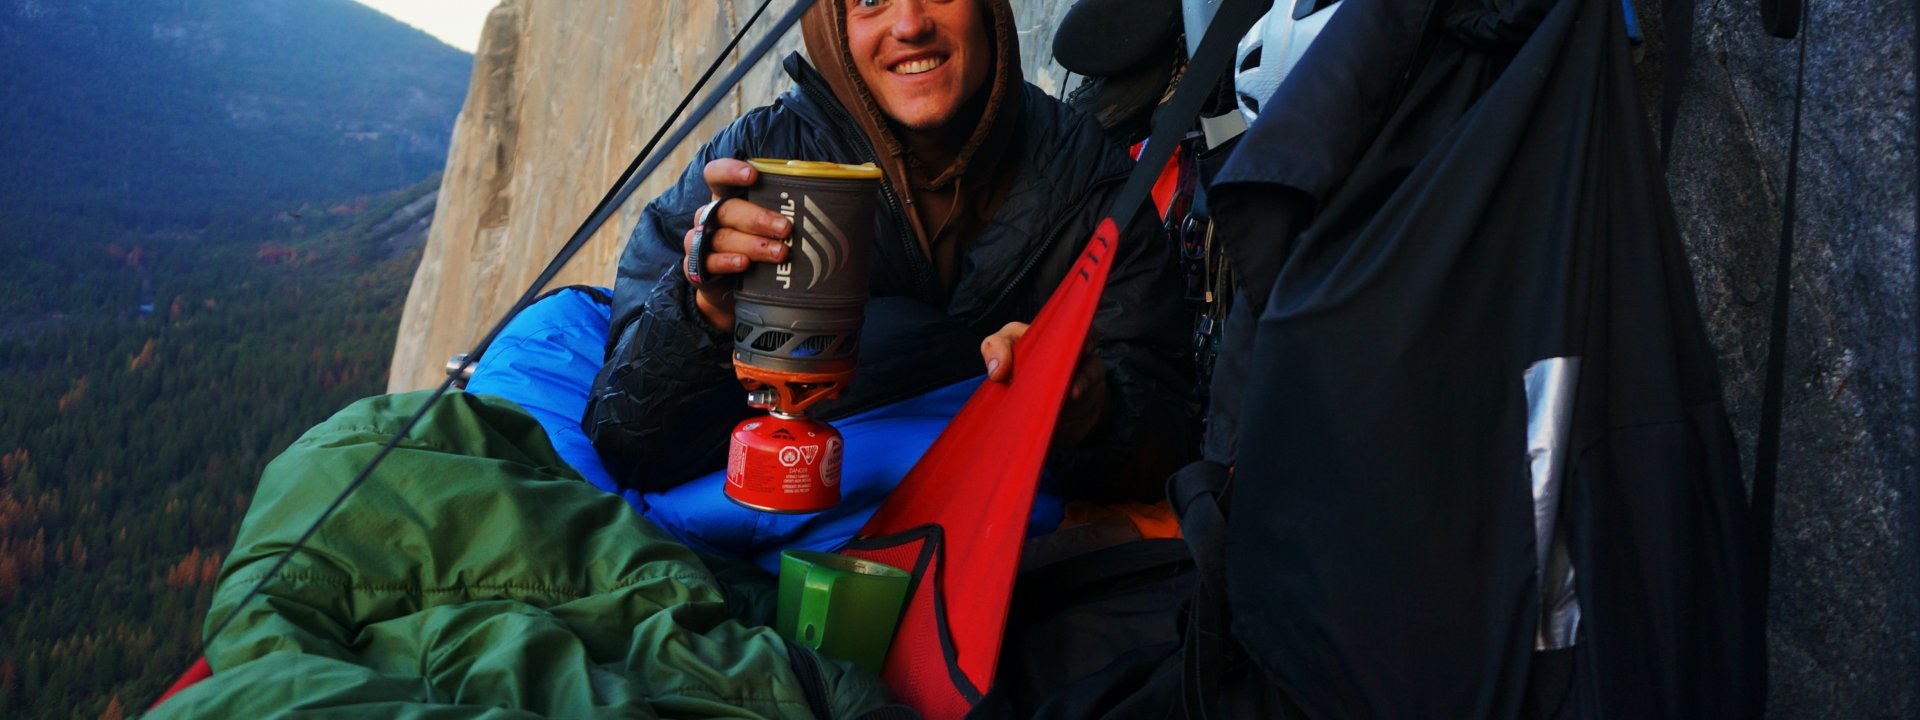 Michael enjoying the warmth of the jetboil. 